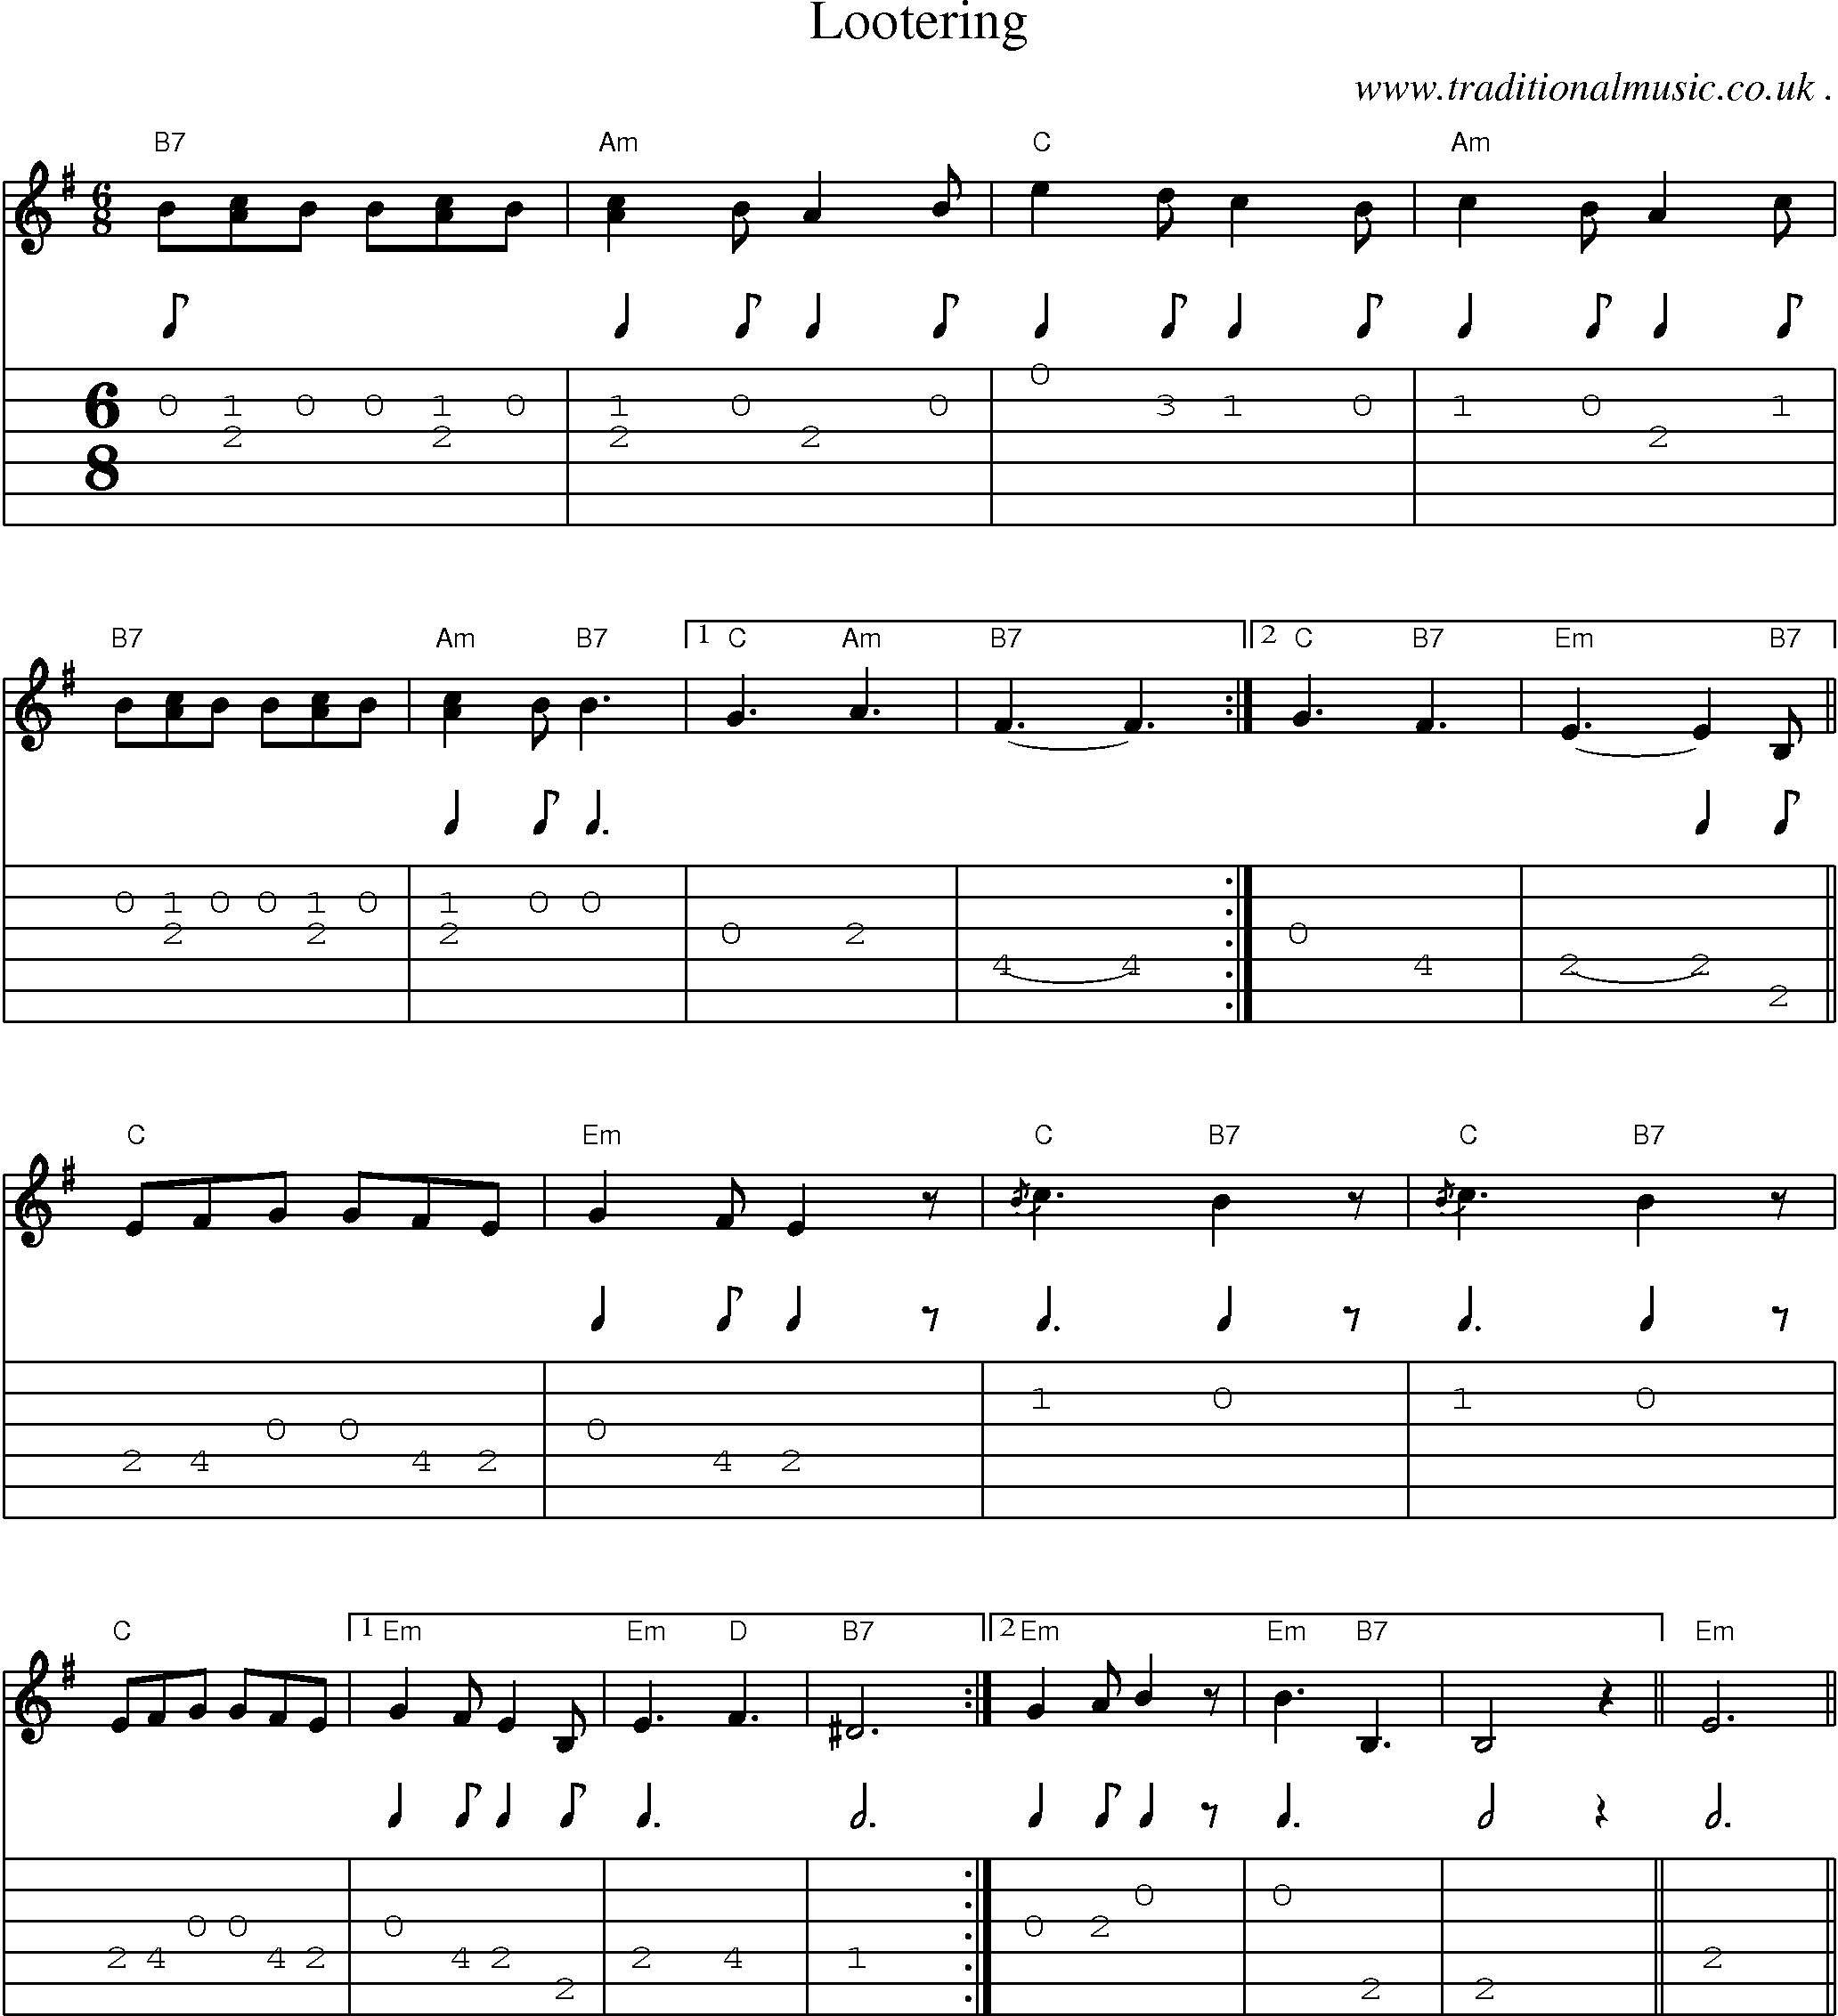 Music Score and Guitar Tabs for Lootering